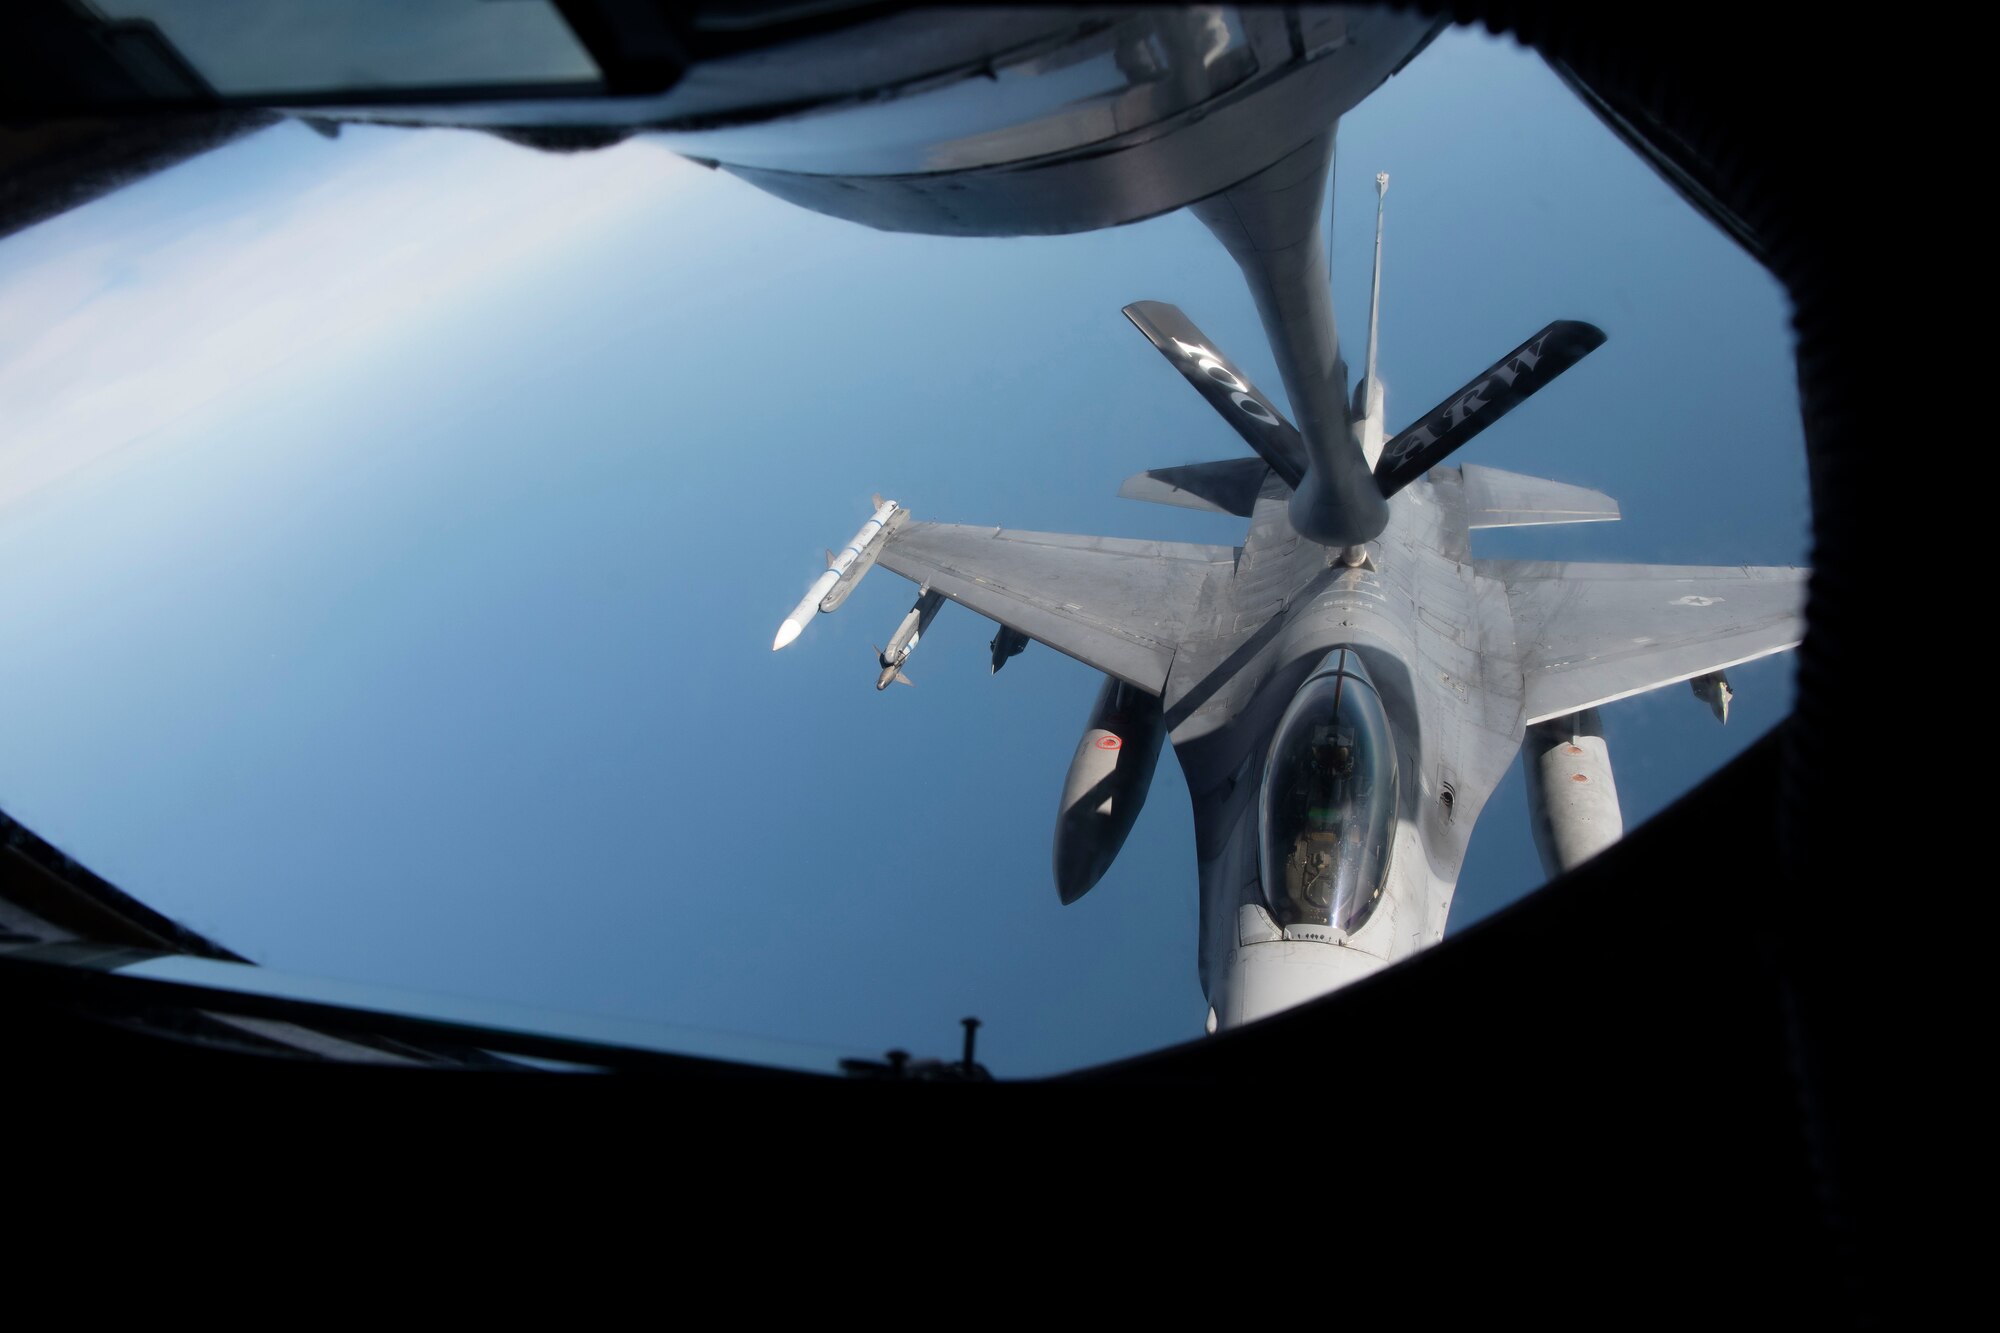 A U.S. Air Force F-16C Fighting Falcon aircraft assigned to the 31st Fighter Wing, Aviano Air Base, Italy, receives fuel over the North Sea from a KC-135 Stratotanker aircraft assigned to the 100th Air Refueling Wing during exercise Cobra Warrior 22, Sept. 21, 2022. The United States’ commitment to defending NATO territory is ironclad and the U.S. will continue to bolster its posture to better defend partners and allies. (U.S. Air Force photo by Tech. Sgt. Anthony Hetlage)